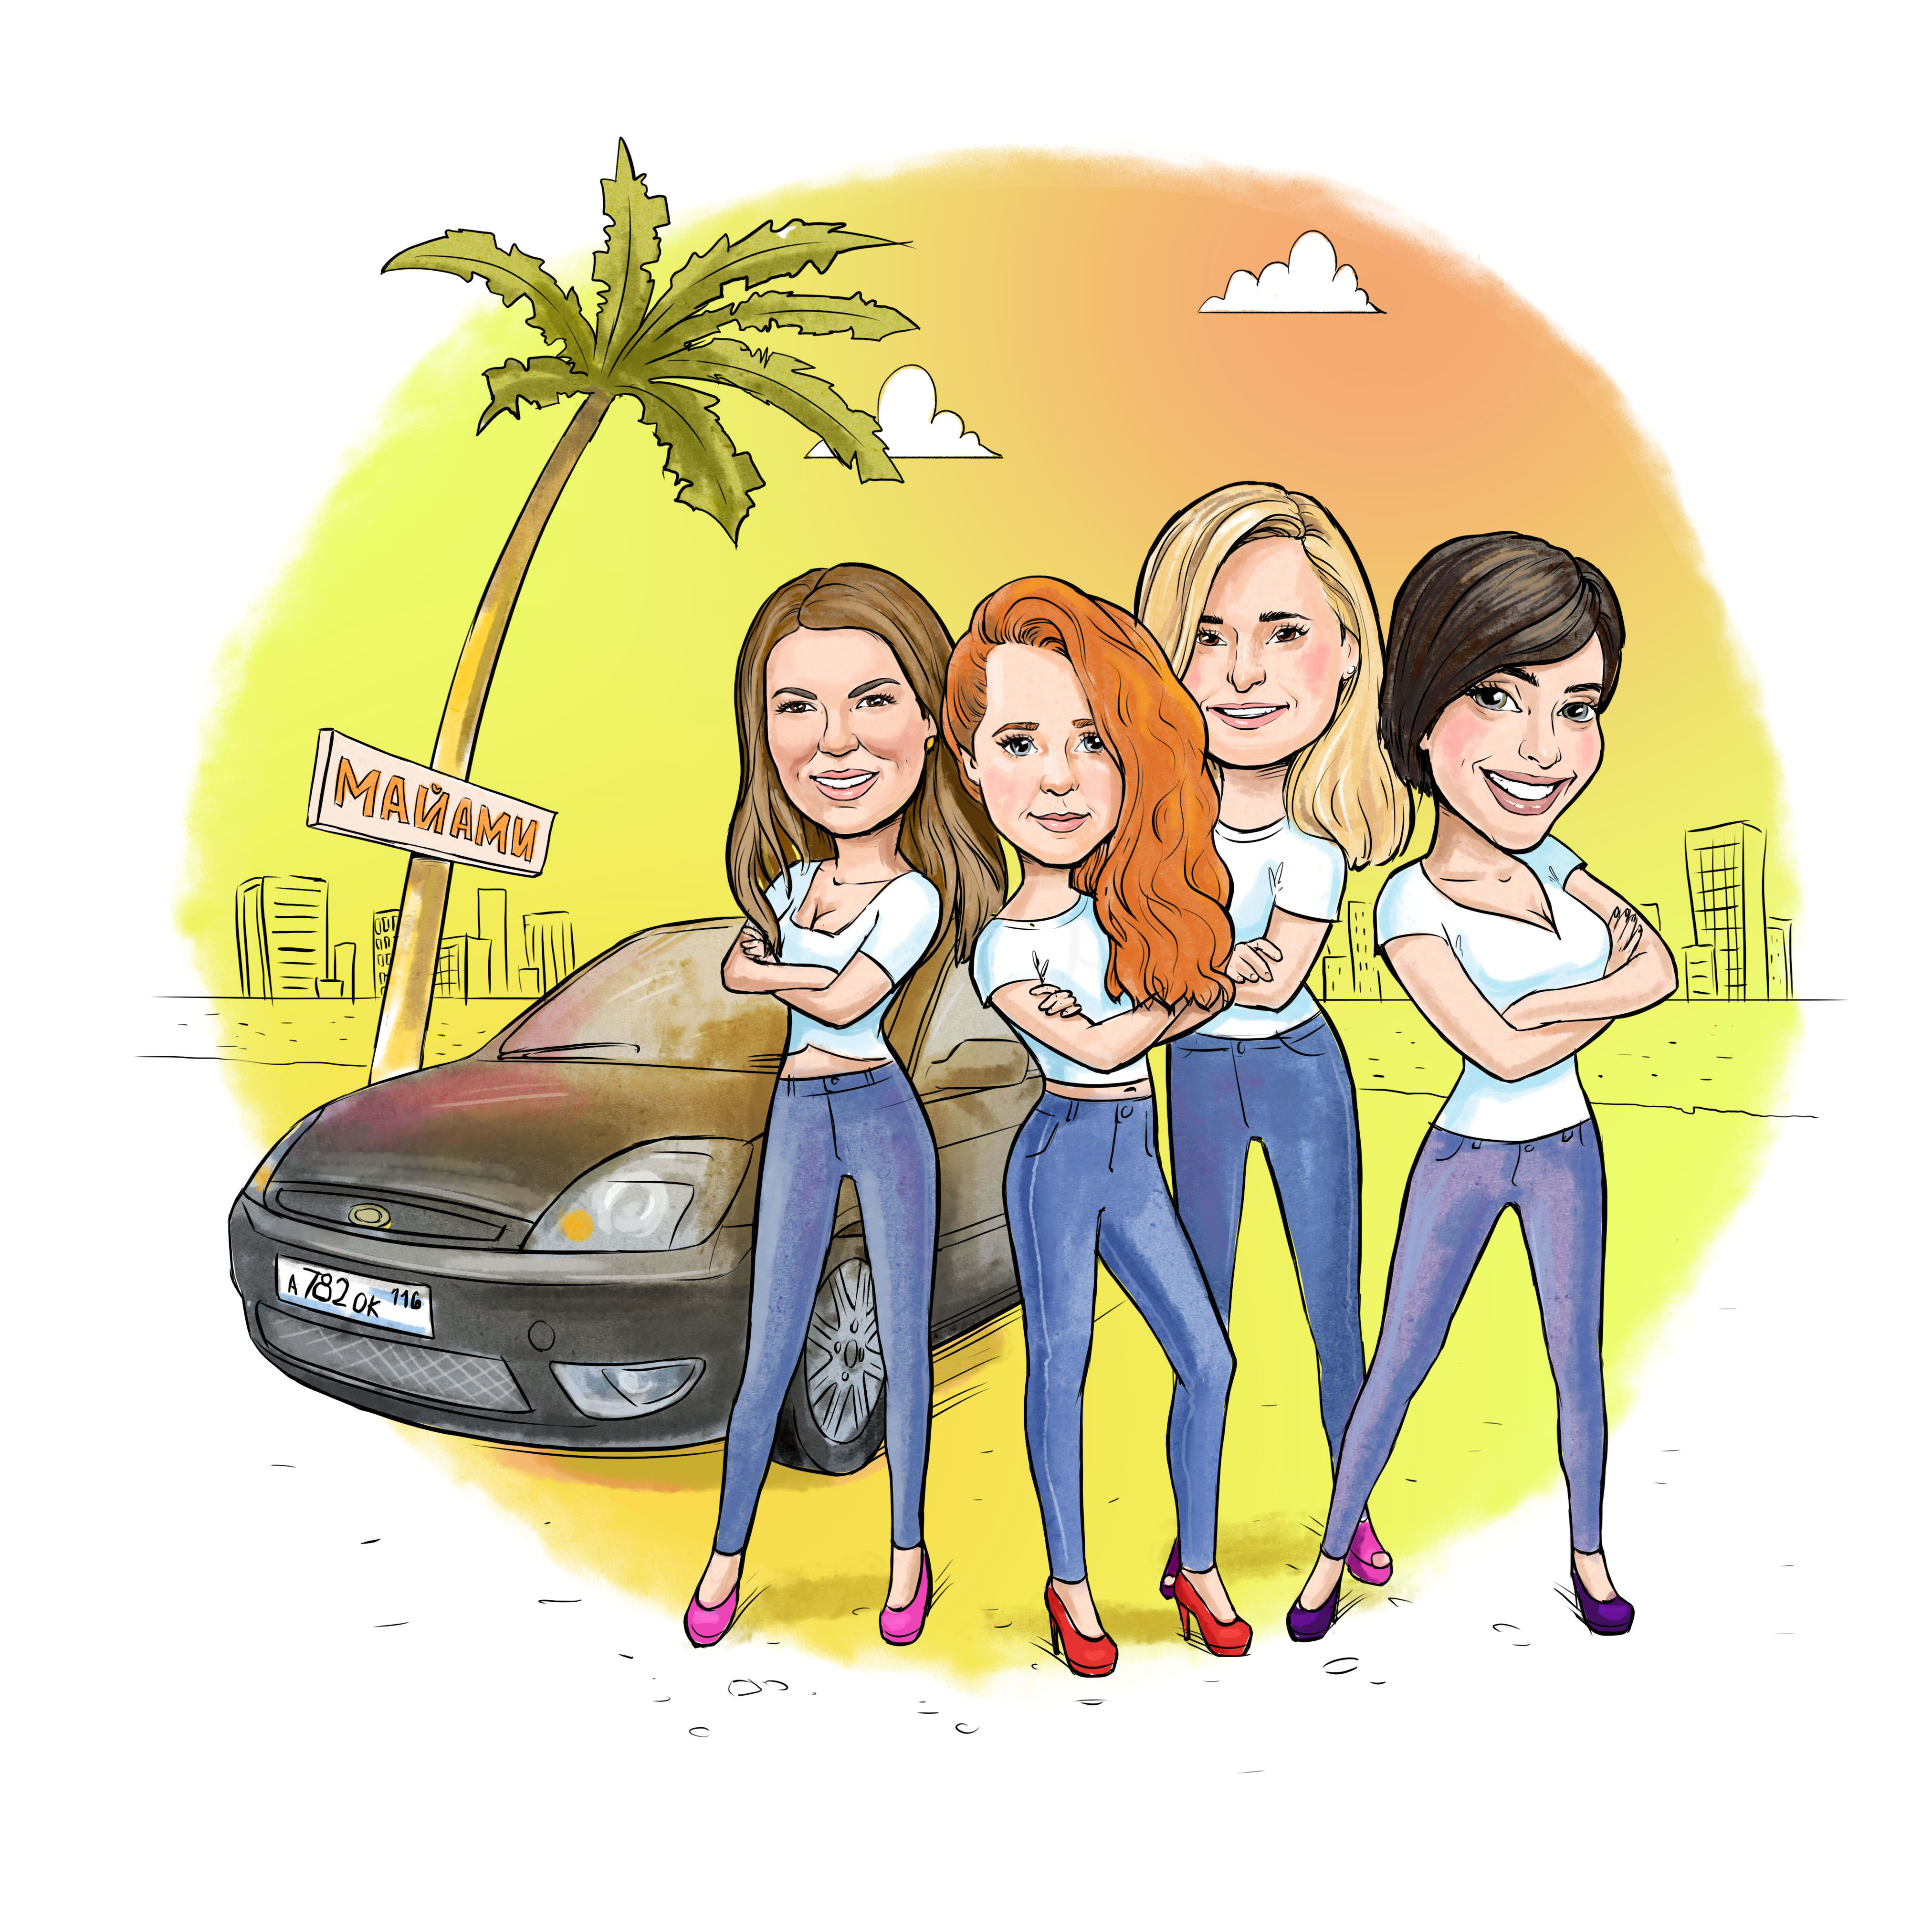 Draw A Group Friends Or Family Caricature For You By Daniila1 Fiverr